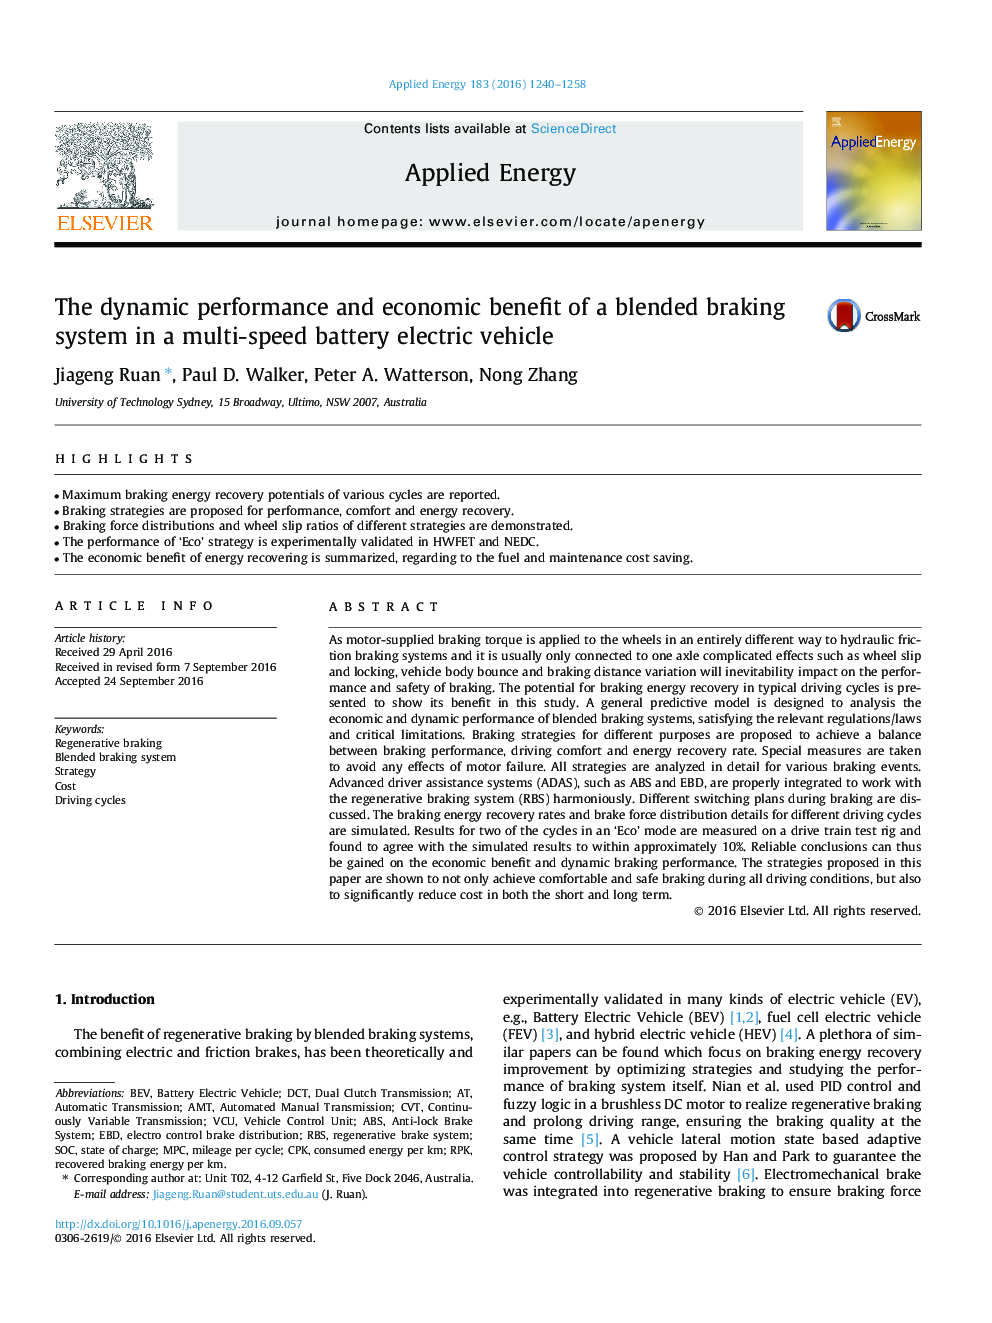 The dynamic performance and economic benefit of a blended braking system in a multi-speed battery electric vehicle